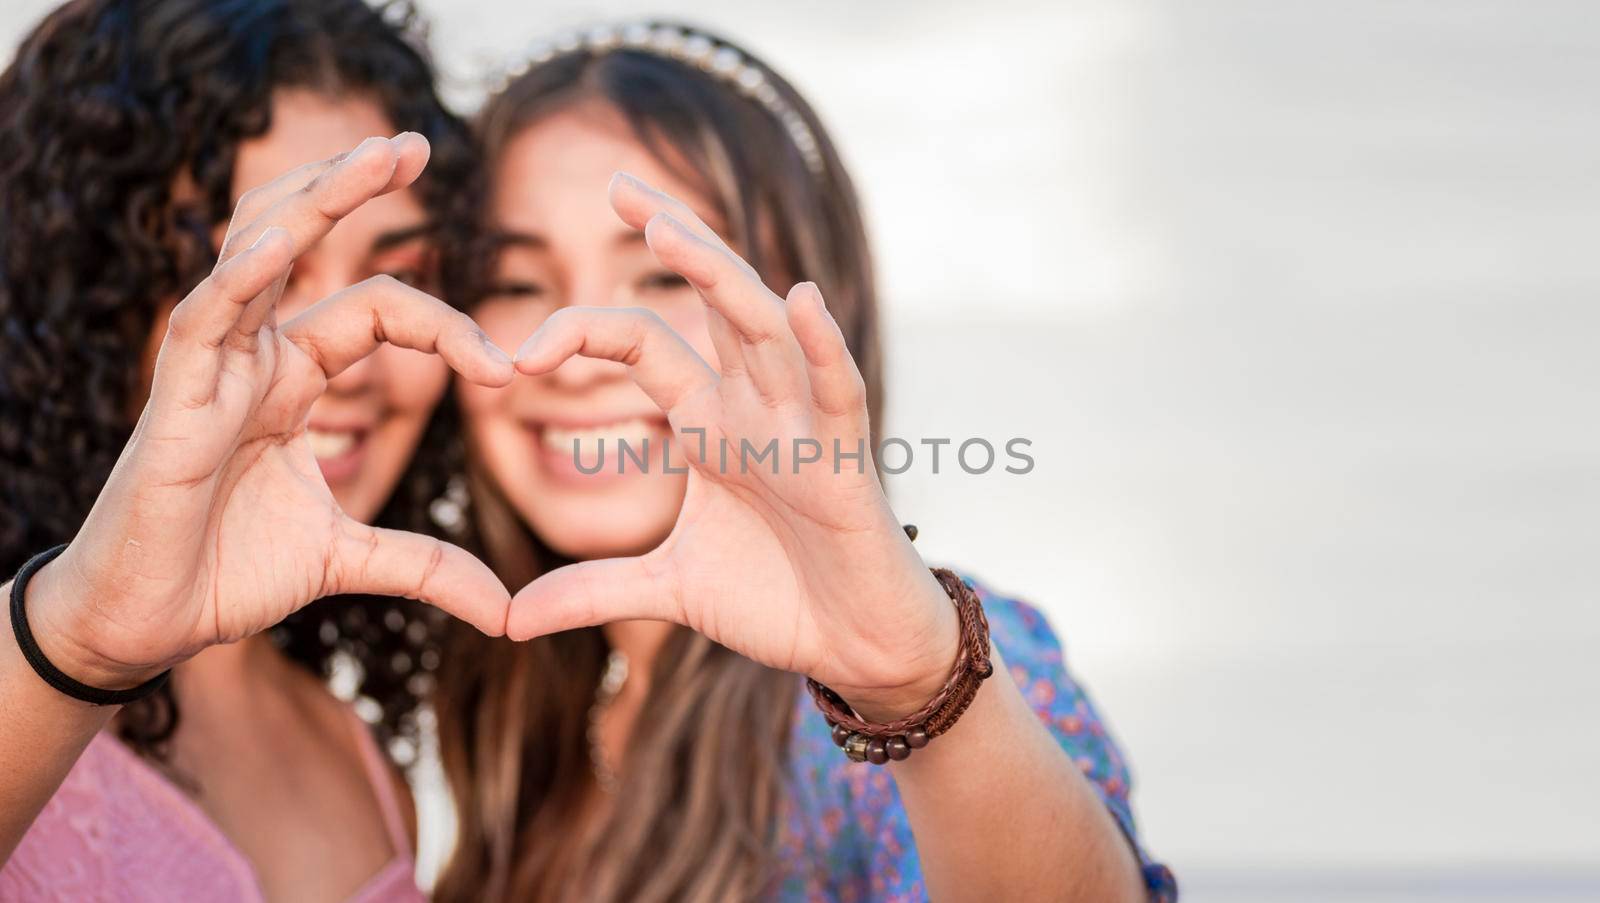 Close up of two girls making a heart shape, two friends together forming a heart, love hands sign by isaiphoto